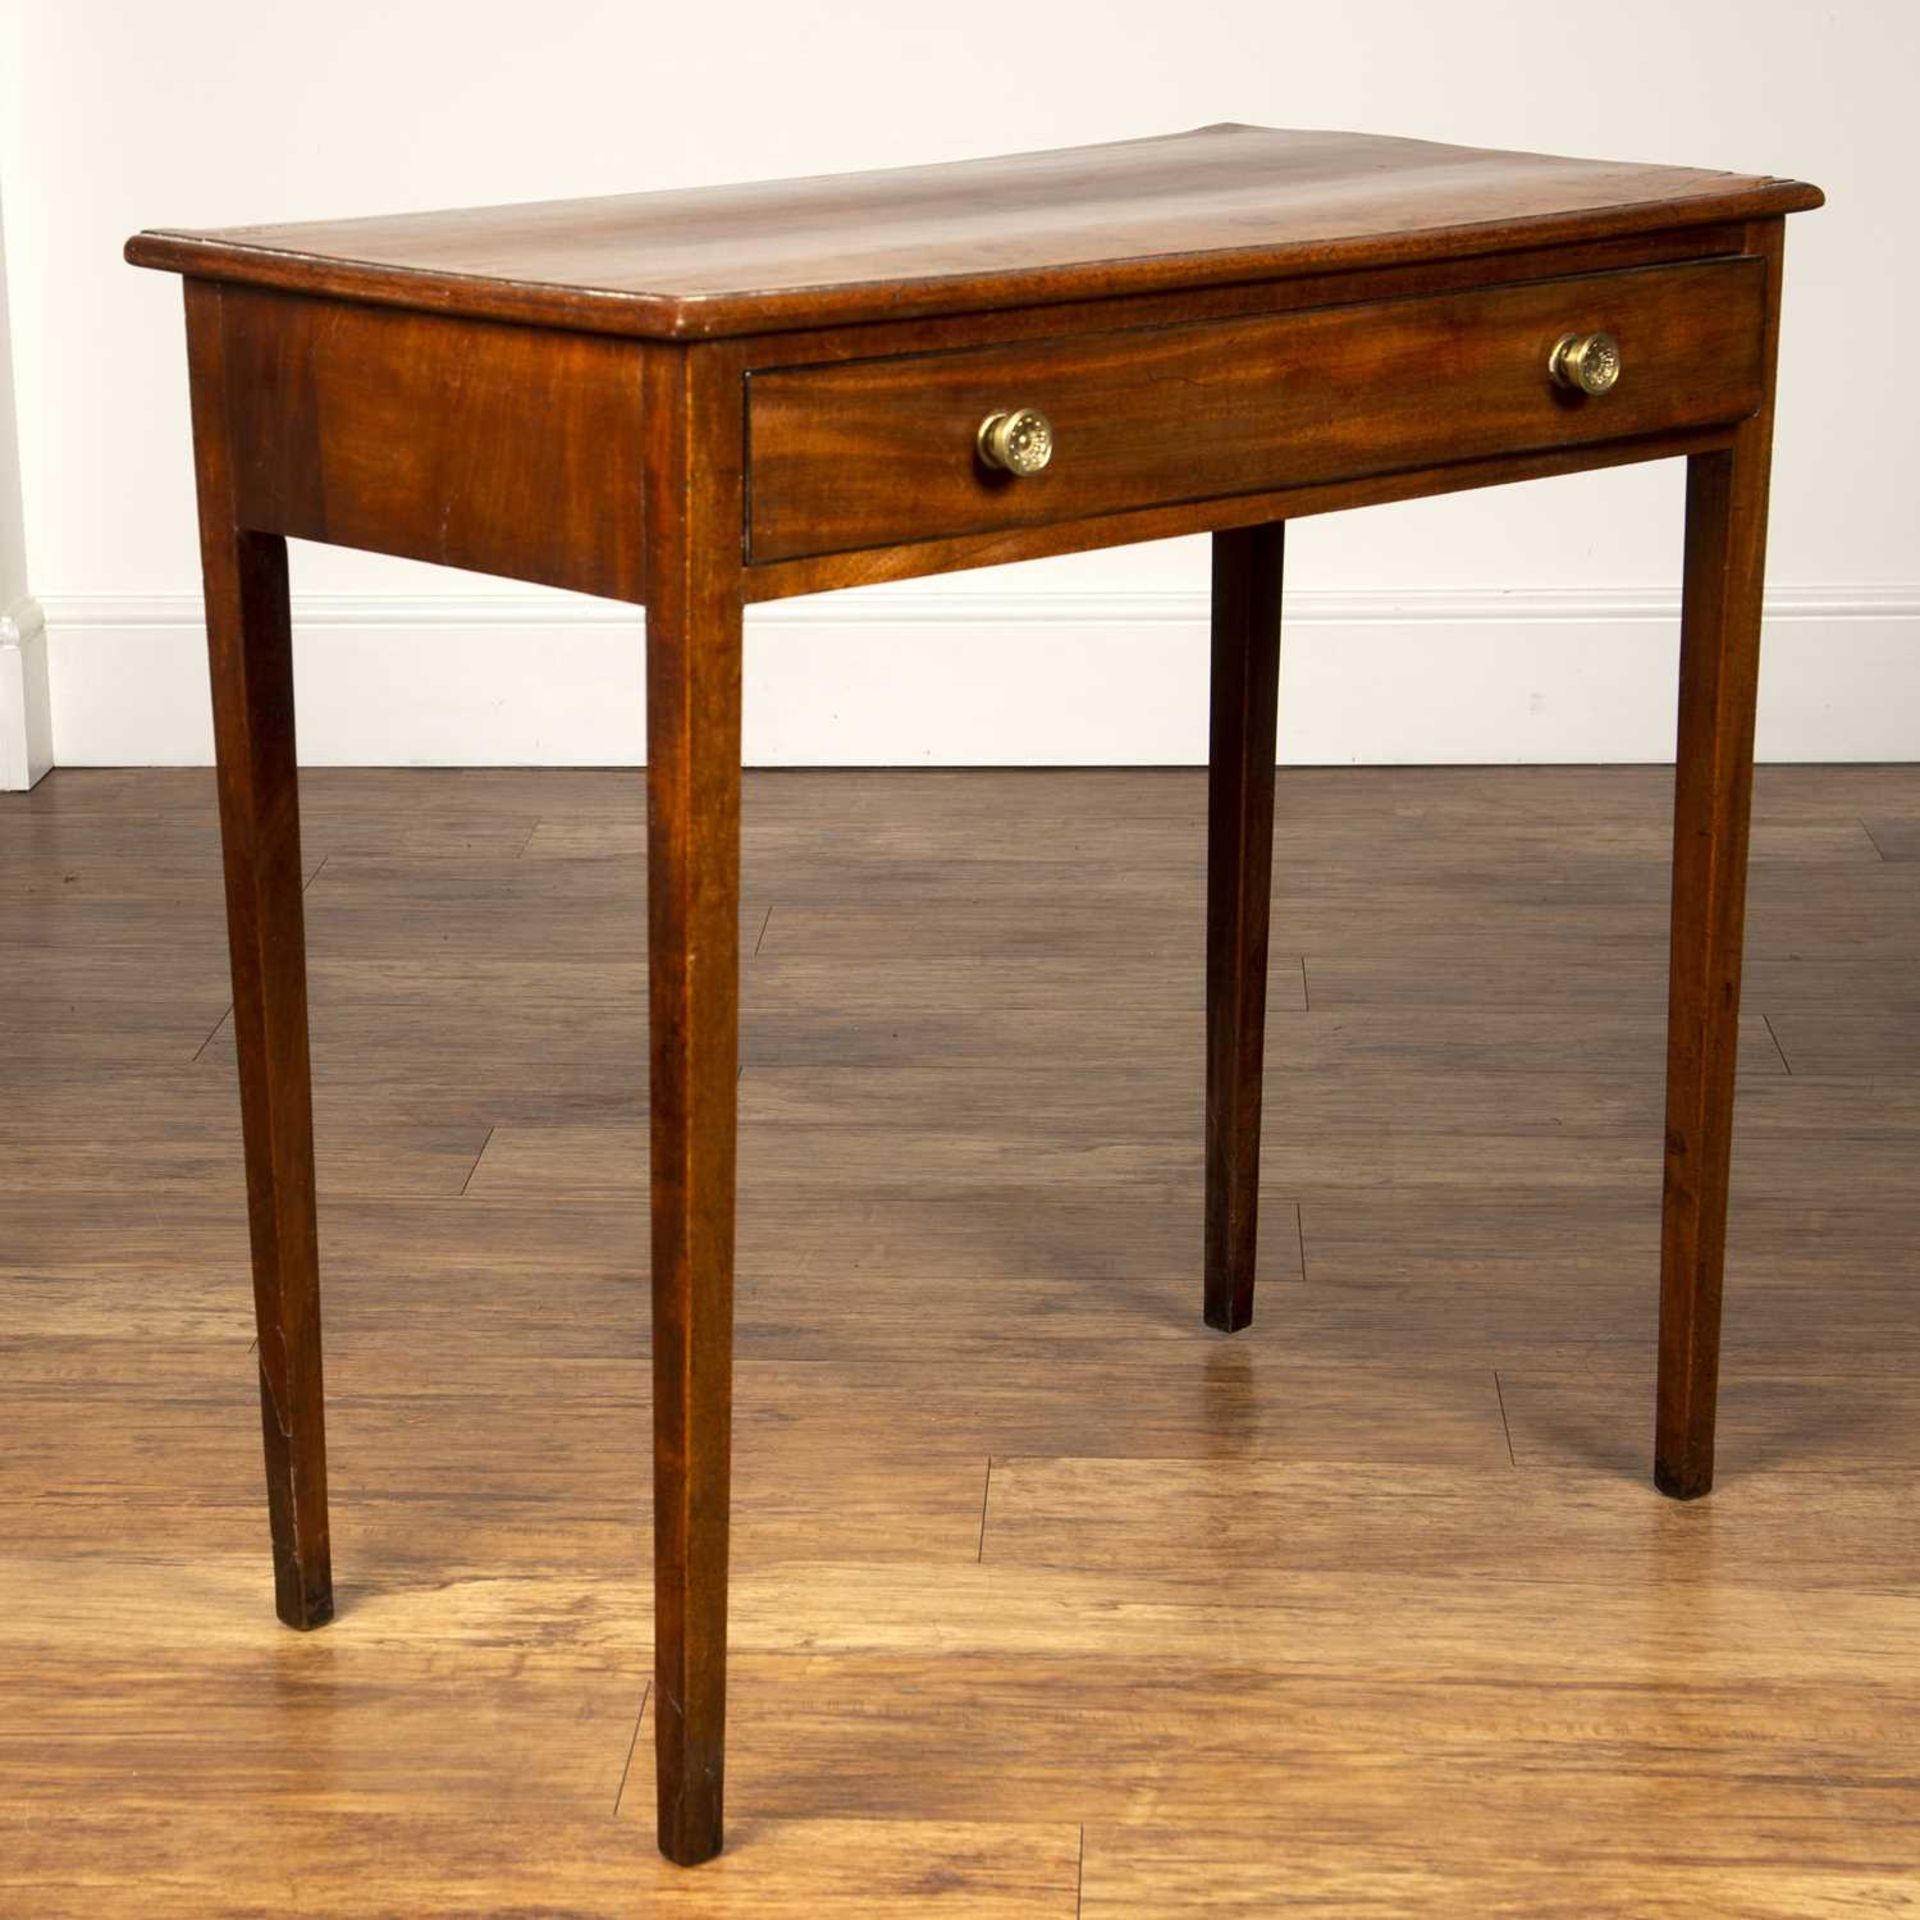 Mahogany side table 19th Century, with single long frieze drawer, with round brass handles, 80cm - Image 2 of 6